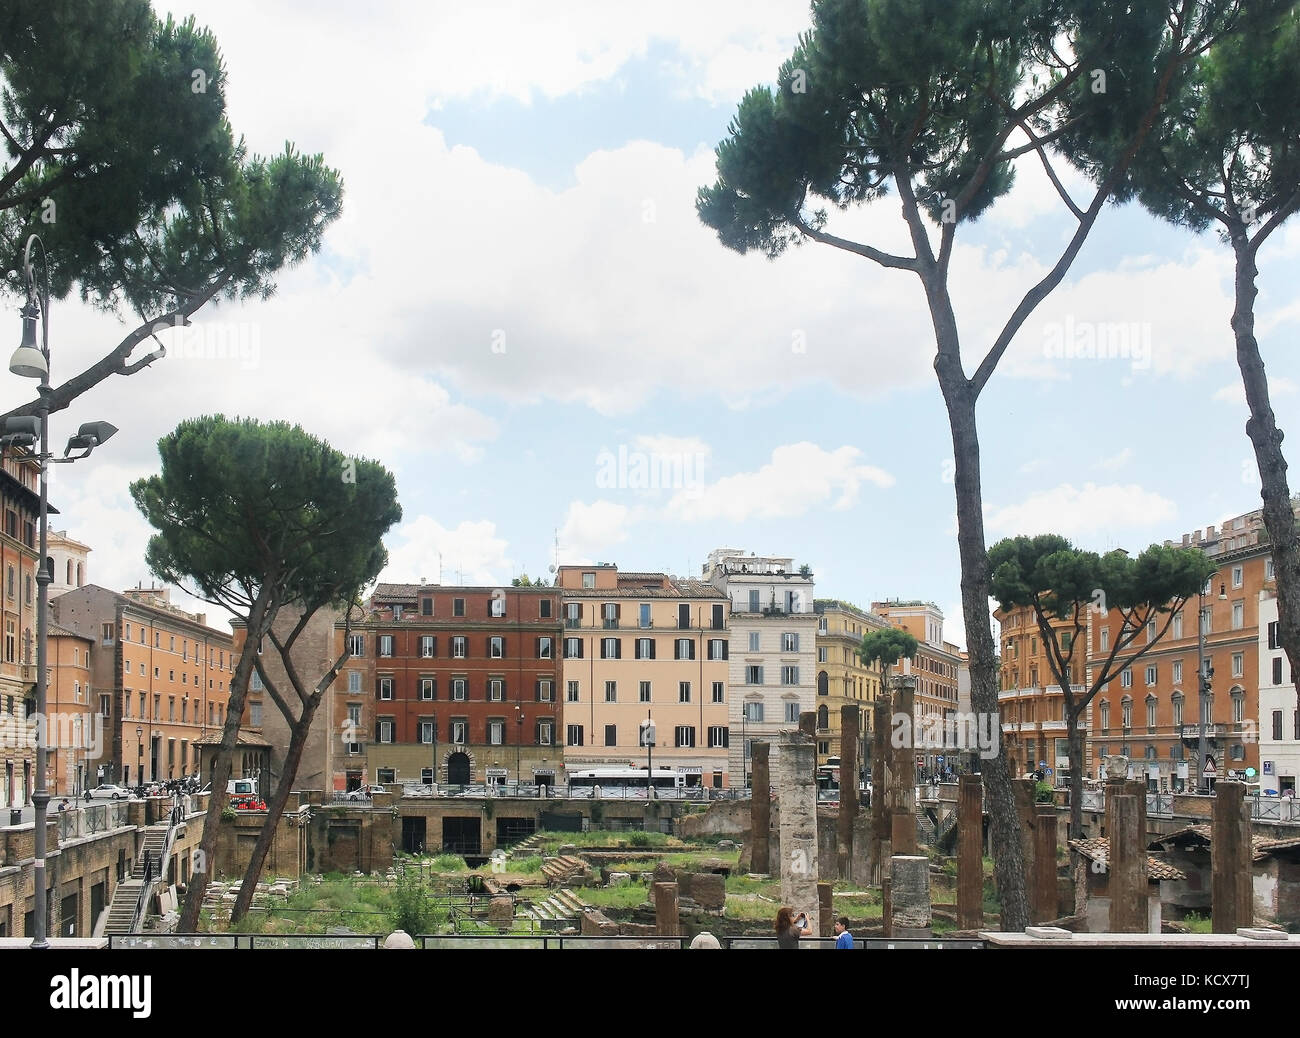 ROME, ITALY – JUNE 30, 2014: Ancient ruins of Roman empire near Coloseo in Rome, Italy - June 30; Popular tourist attraction site with Roman columns i Stock Photo